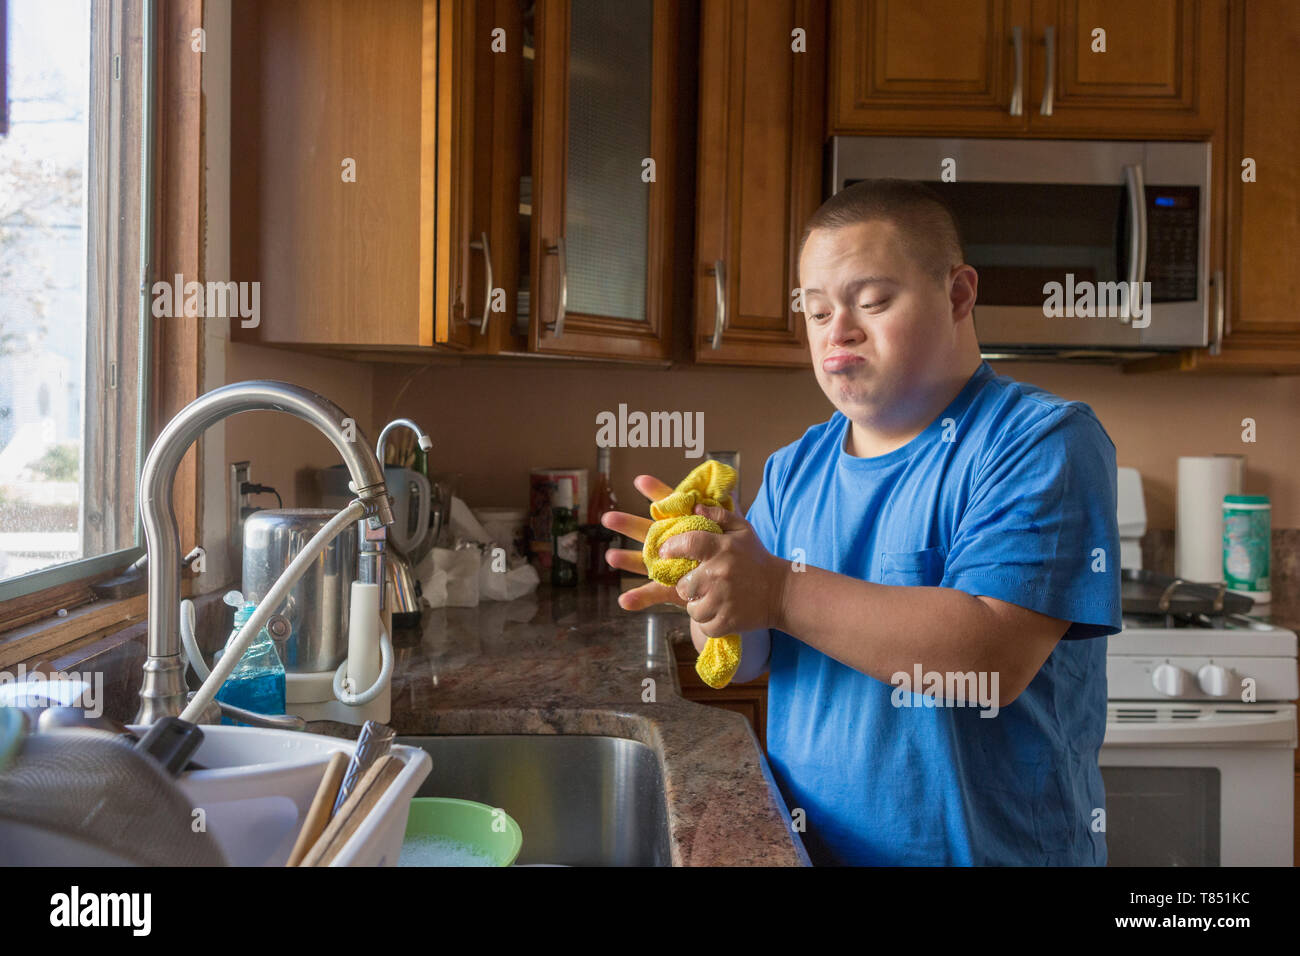 Teen with Down Syndrome doing dishes Stock Photo